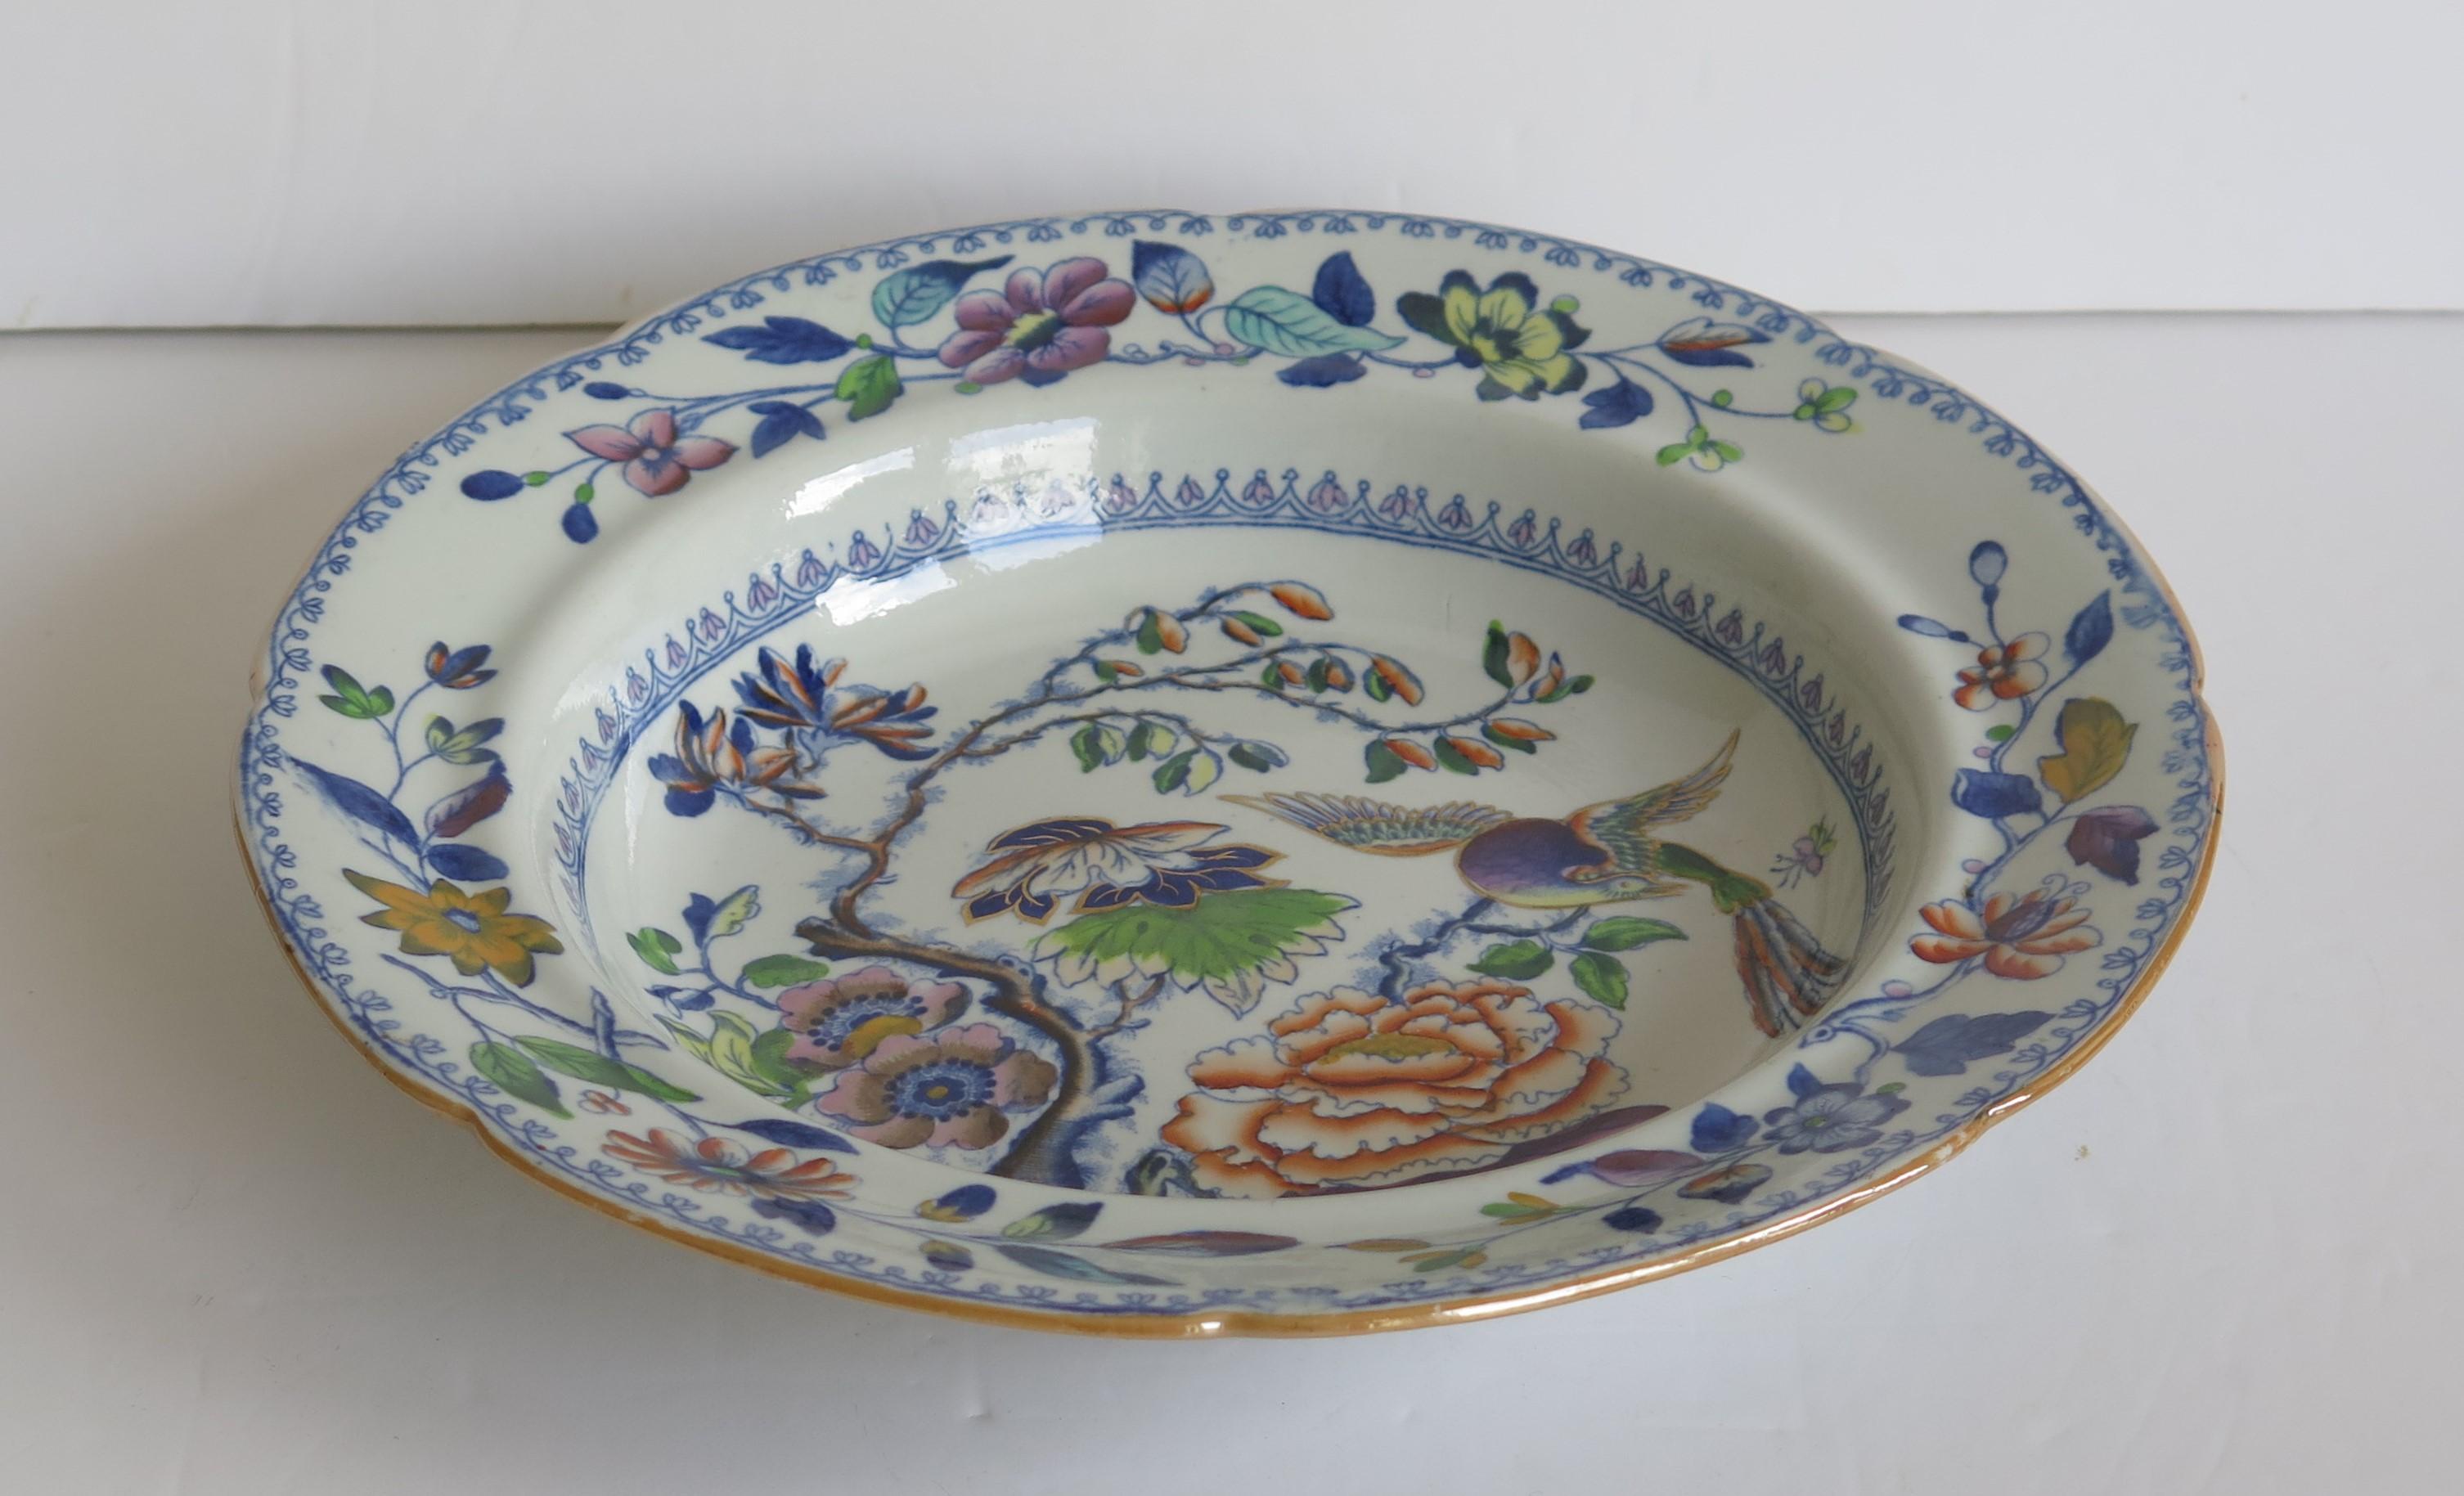 This is a good early hand painted ironstone (stone china) soup bowl or deep plate, made by William Davenport and Co., Longport, Staffordshire Potteries, England, George 111rd period, circa 1815.

The plate is well potted and hand painted, probably